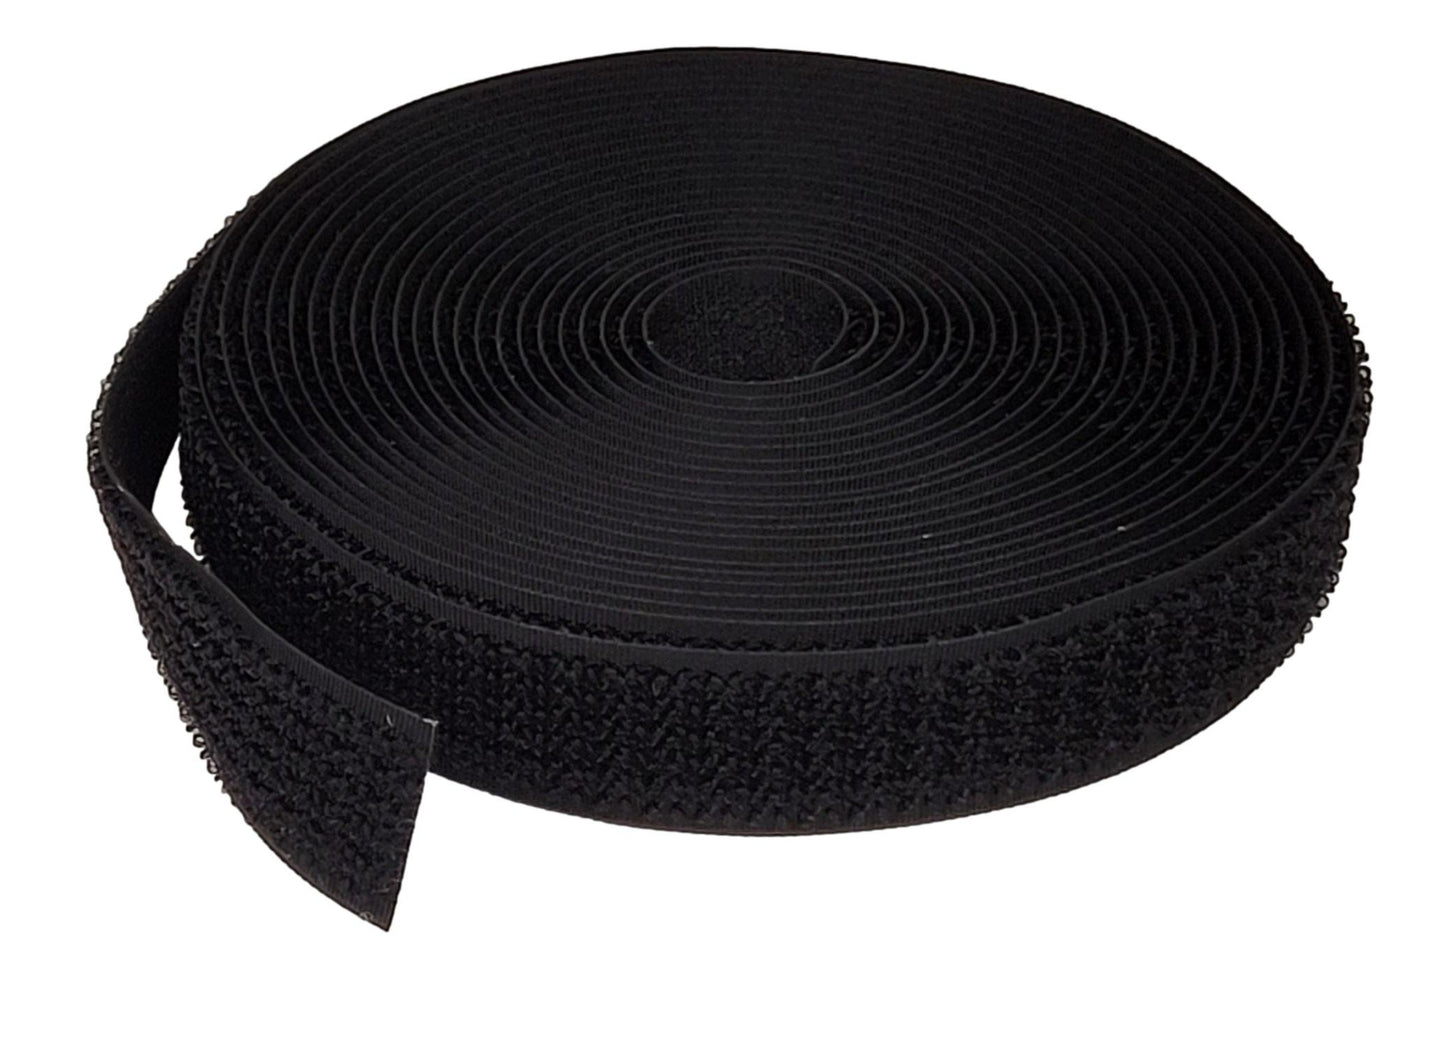 Benristraps 19mm Hook and Loop Together Tape (5 metre roll) (3)